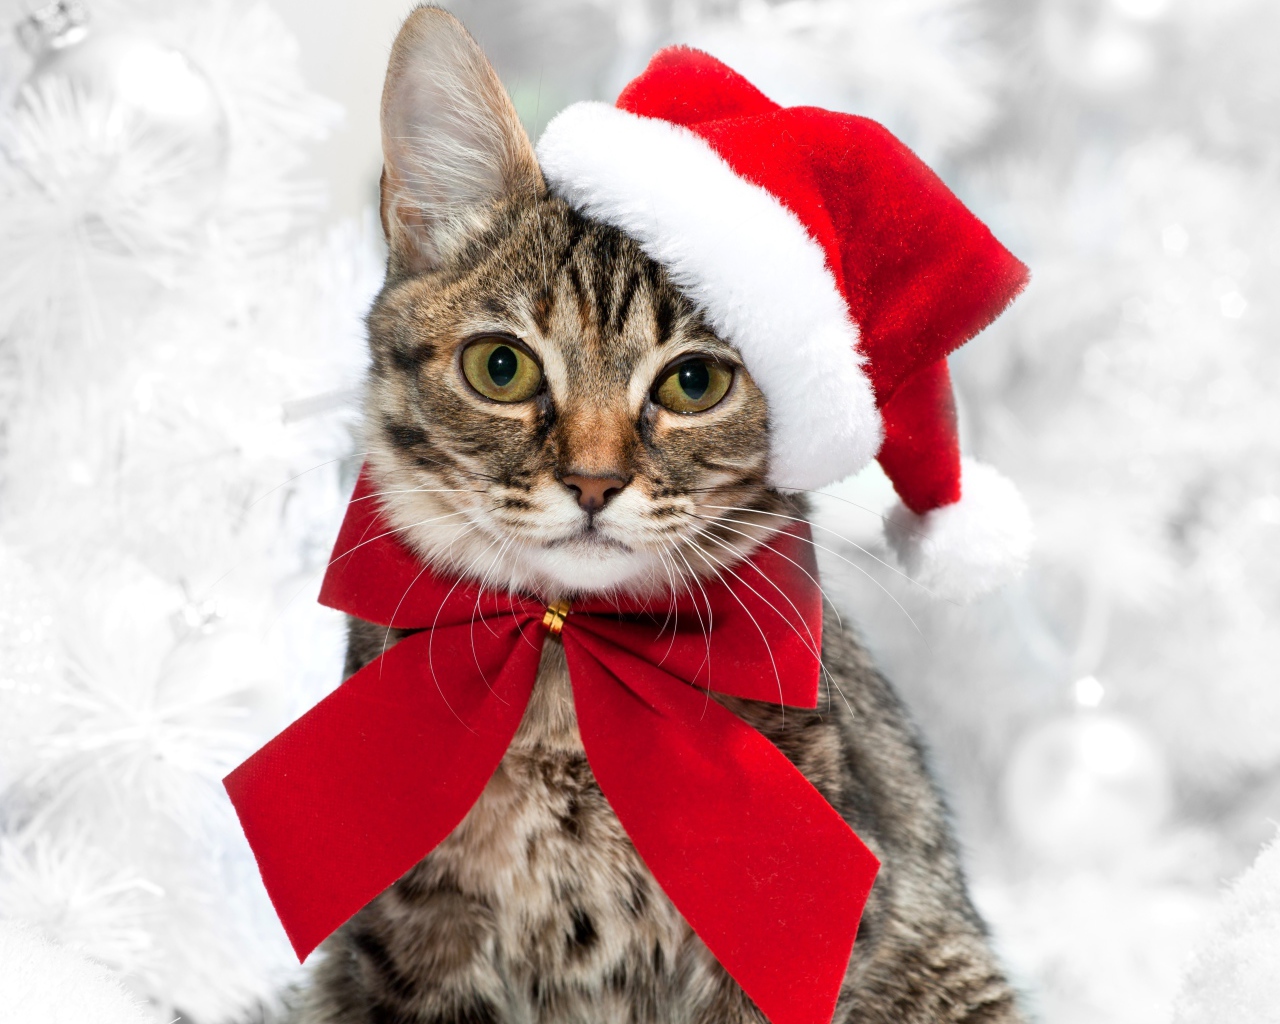 Gray cat in a Christmas hat with a red bow